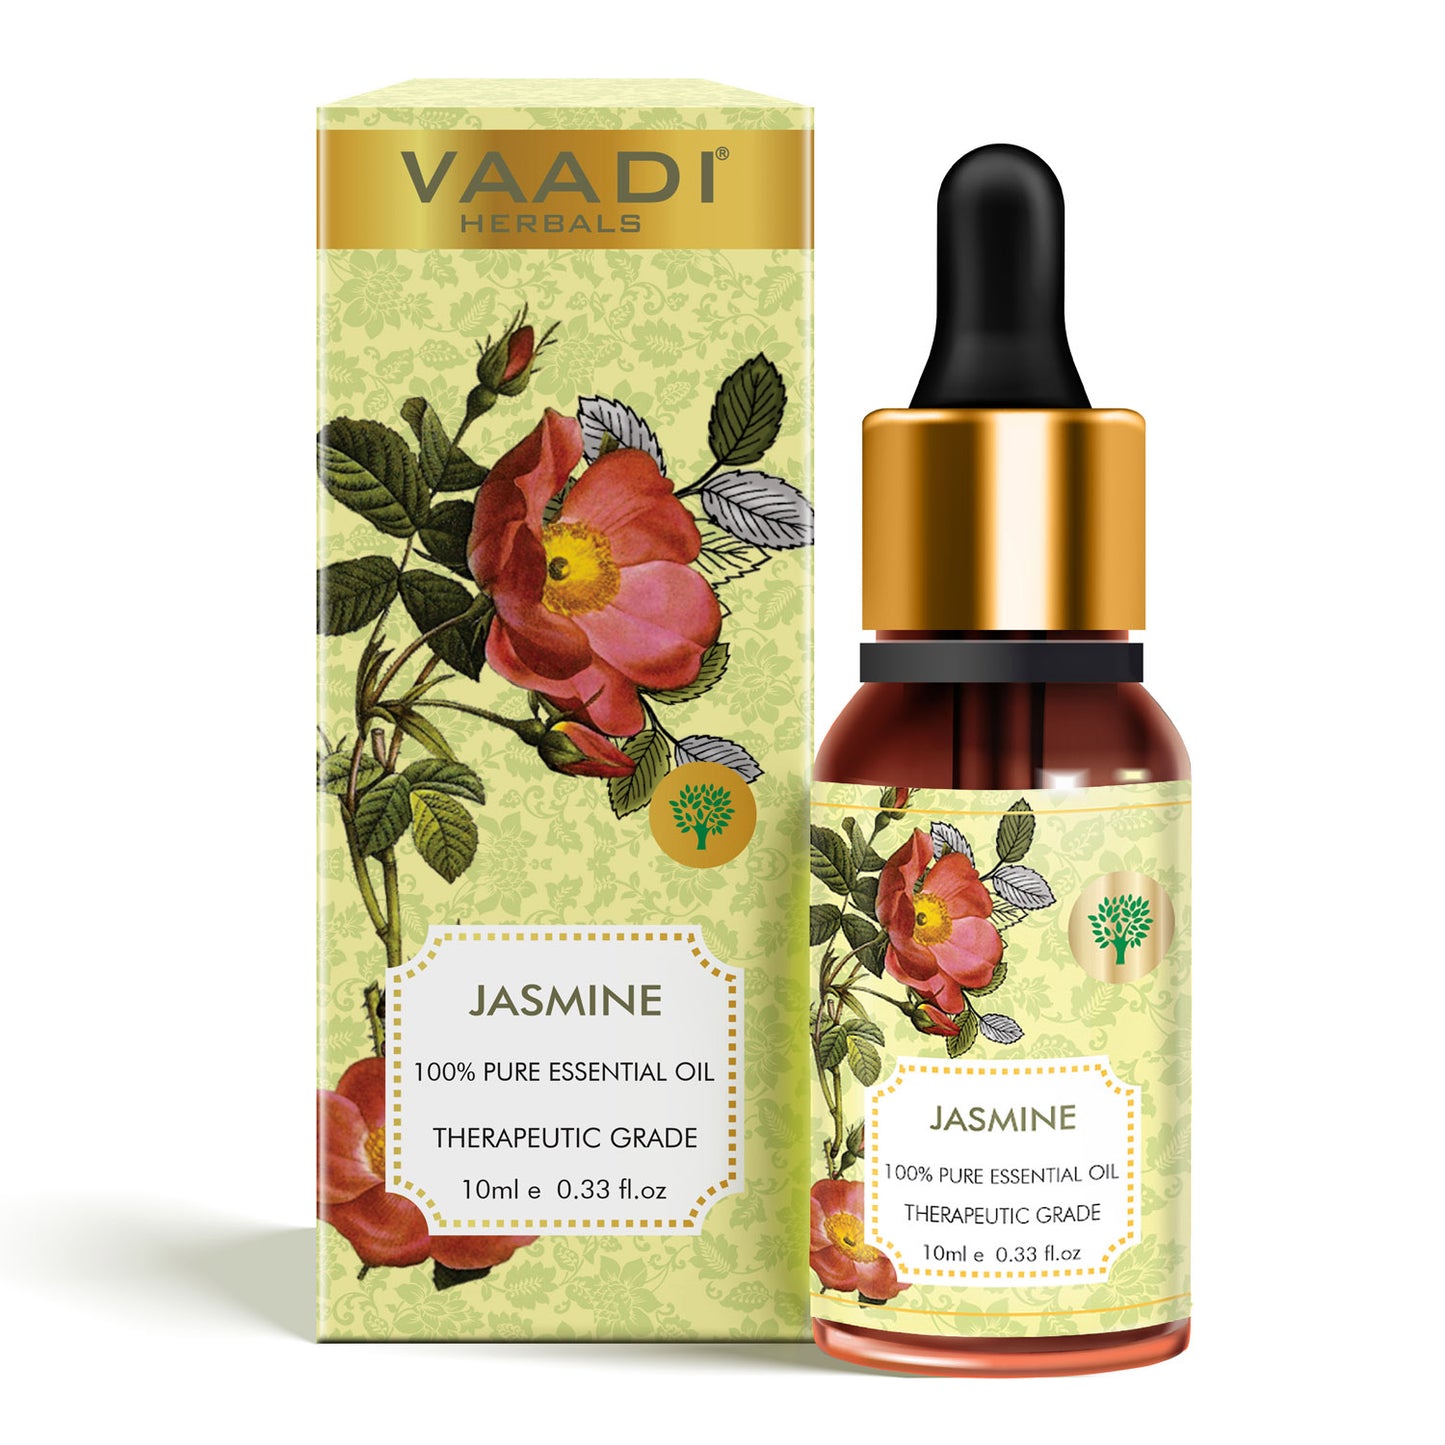 Jasmine Essential Oil - Nourishes Dry & Damaged Hair, Improves Sleep, Uplifts Mood, Reduces Acne & Blemishes - 100% Pure Therapeutic Grade (10 ml)